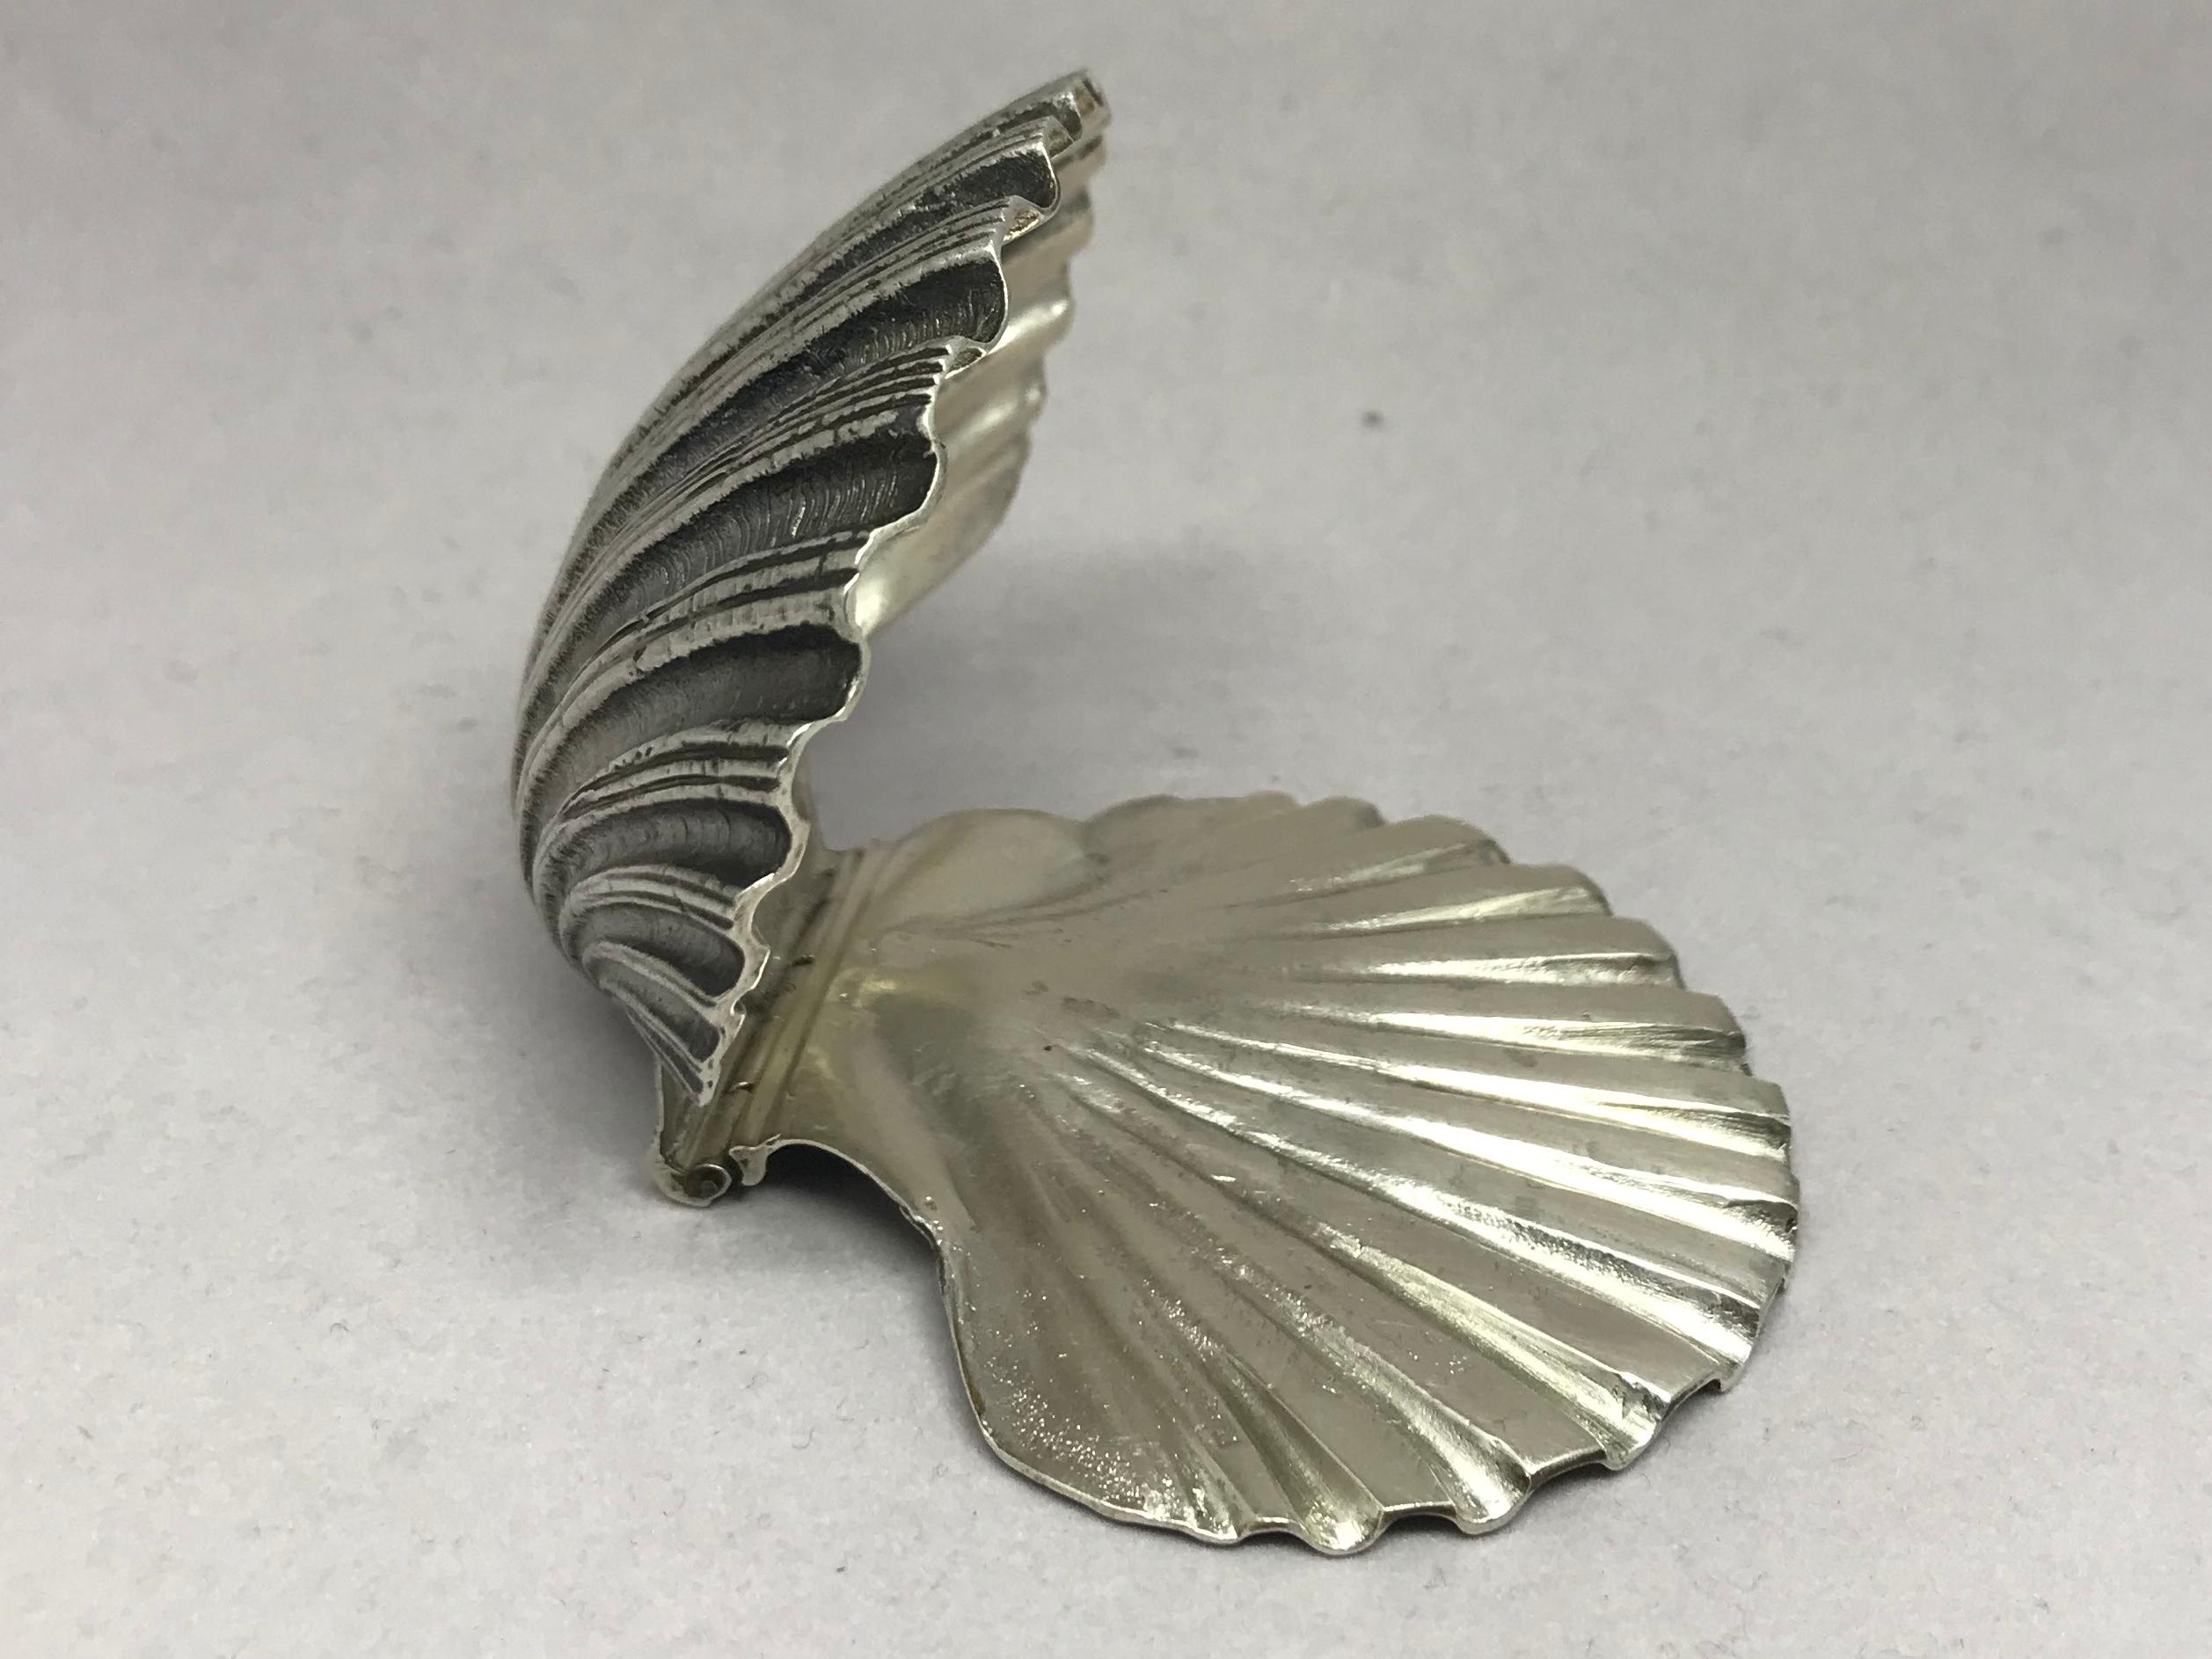 Shell paper clamp in Italian sterling silver. Finely wrought hinged silver shell desk accessory for holding current papers elegantly in place with Italian hallmarks. Italy, circa 1930.
Dimensions: 3